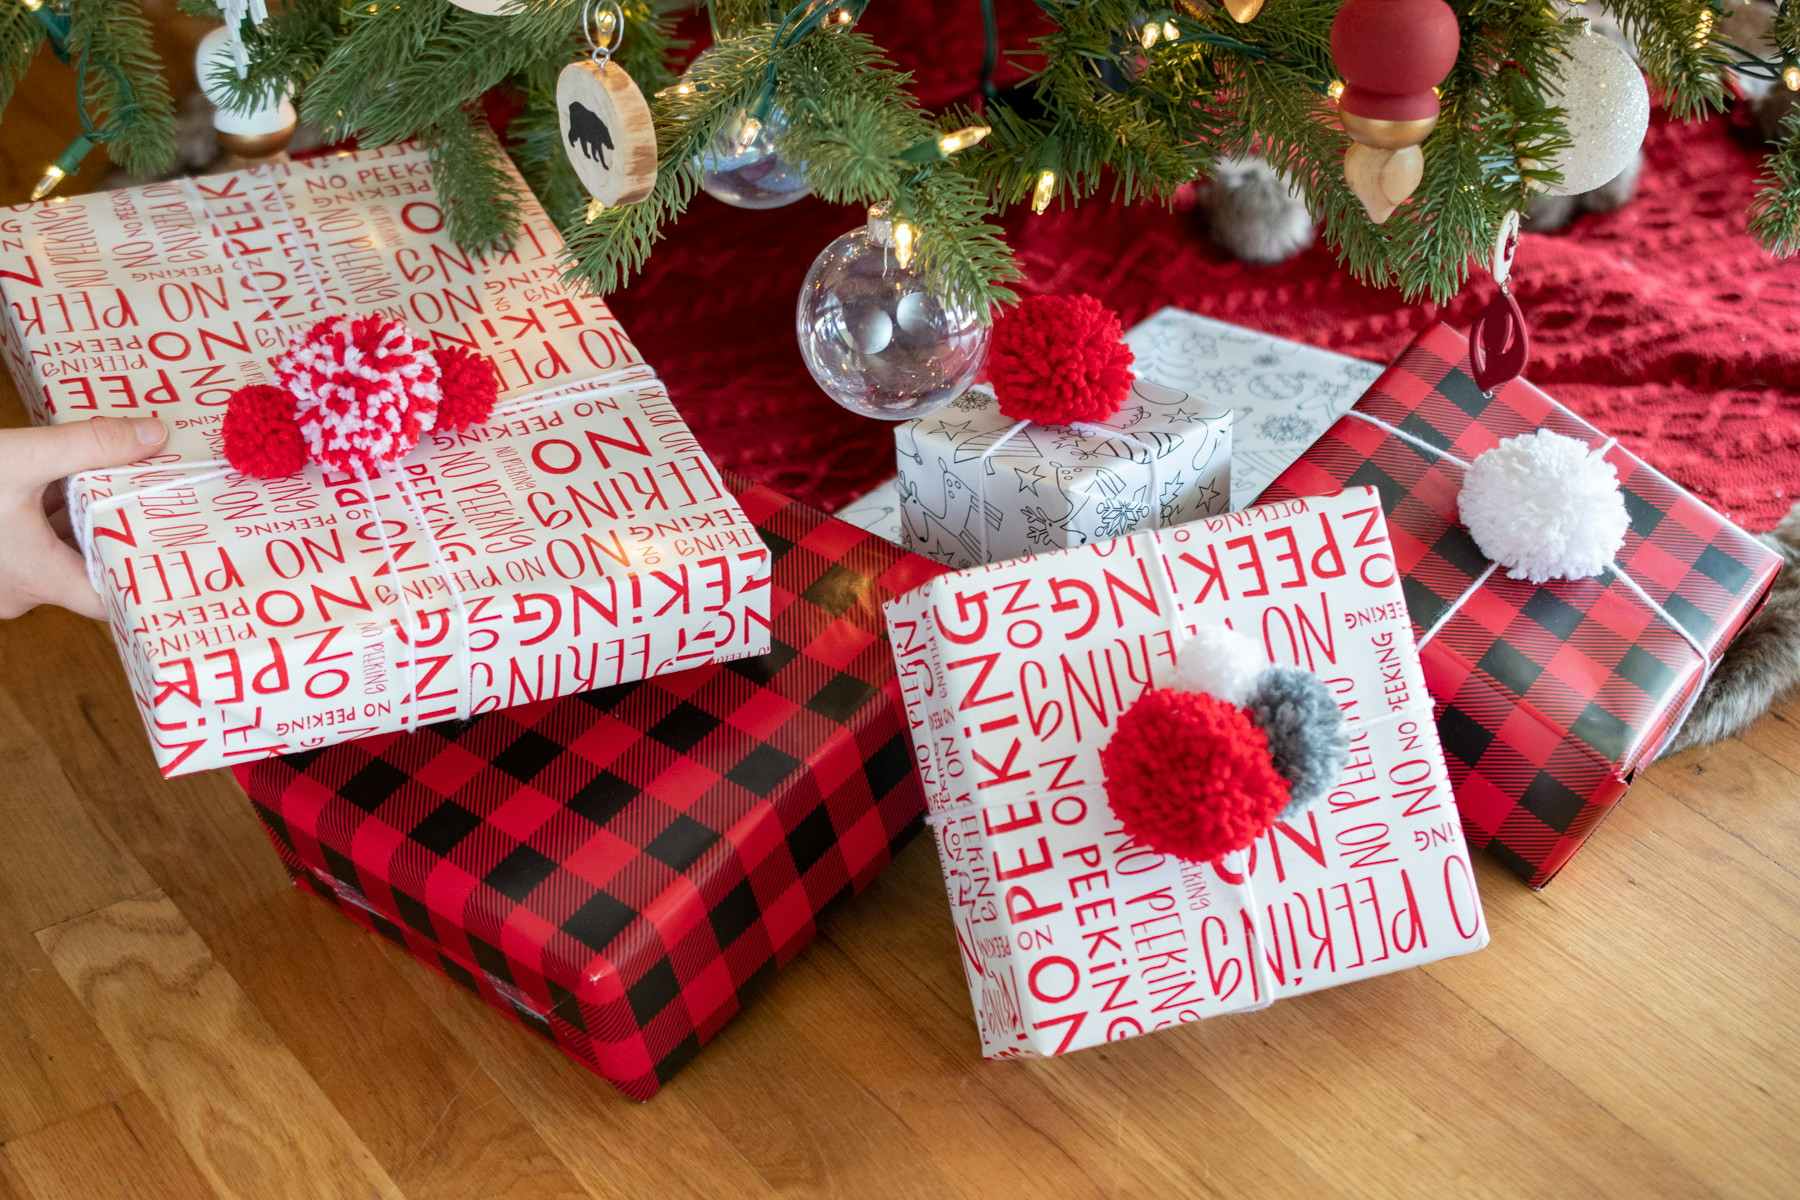 Boxes under a Christmas tree, wrapped in Christmas wrapping paper with yarn pom pom ball bows on top of them.